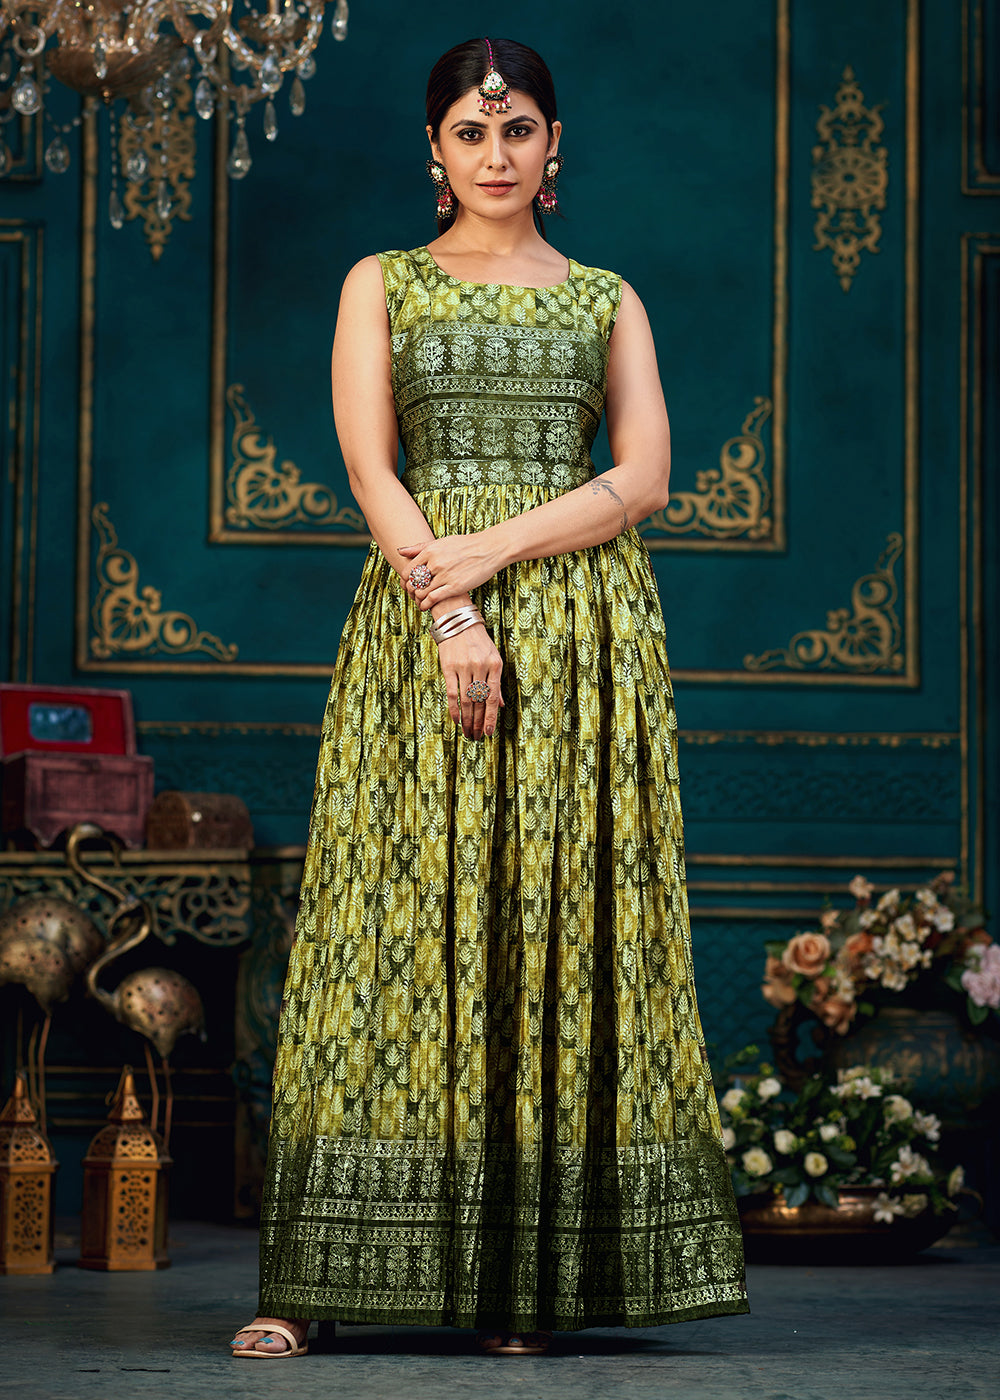 Buy Now Pleasing Green Digital Foil Printed Ready to Wear Gown Online in USA, UK, Australia, New Zealand, Canada & Worldwide at Empress Clothing. 